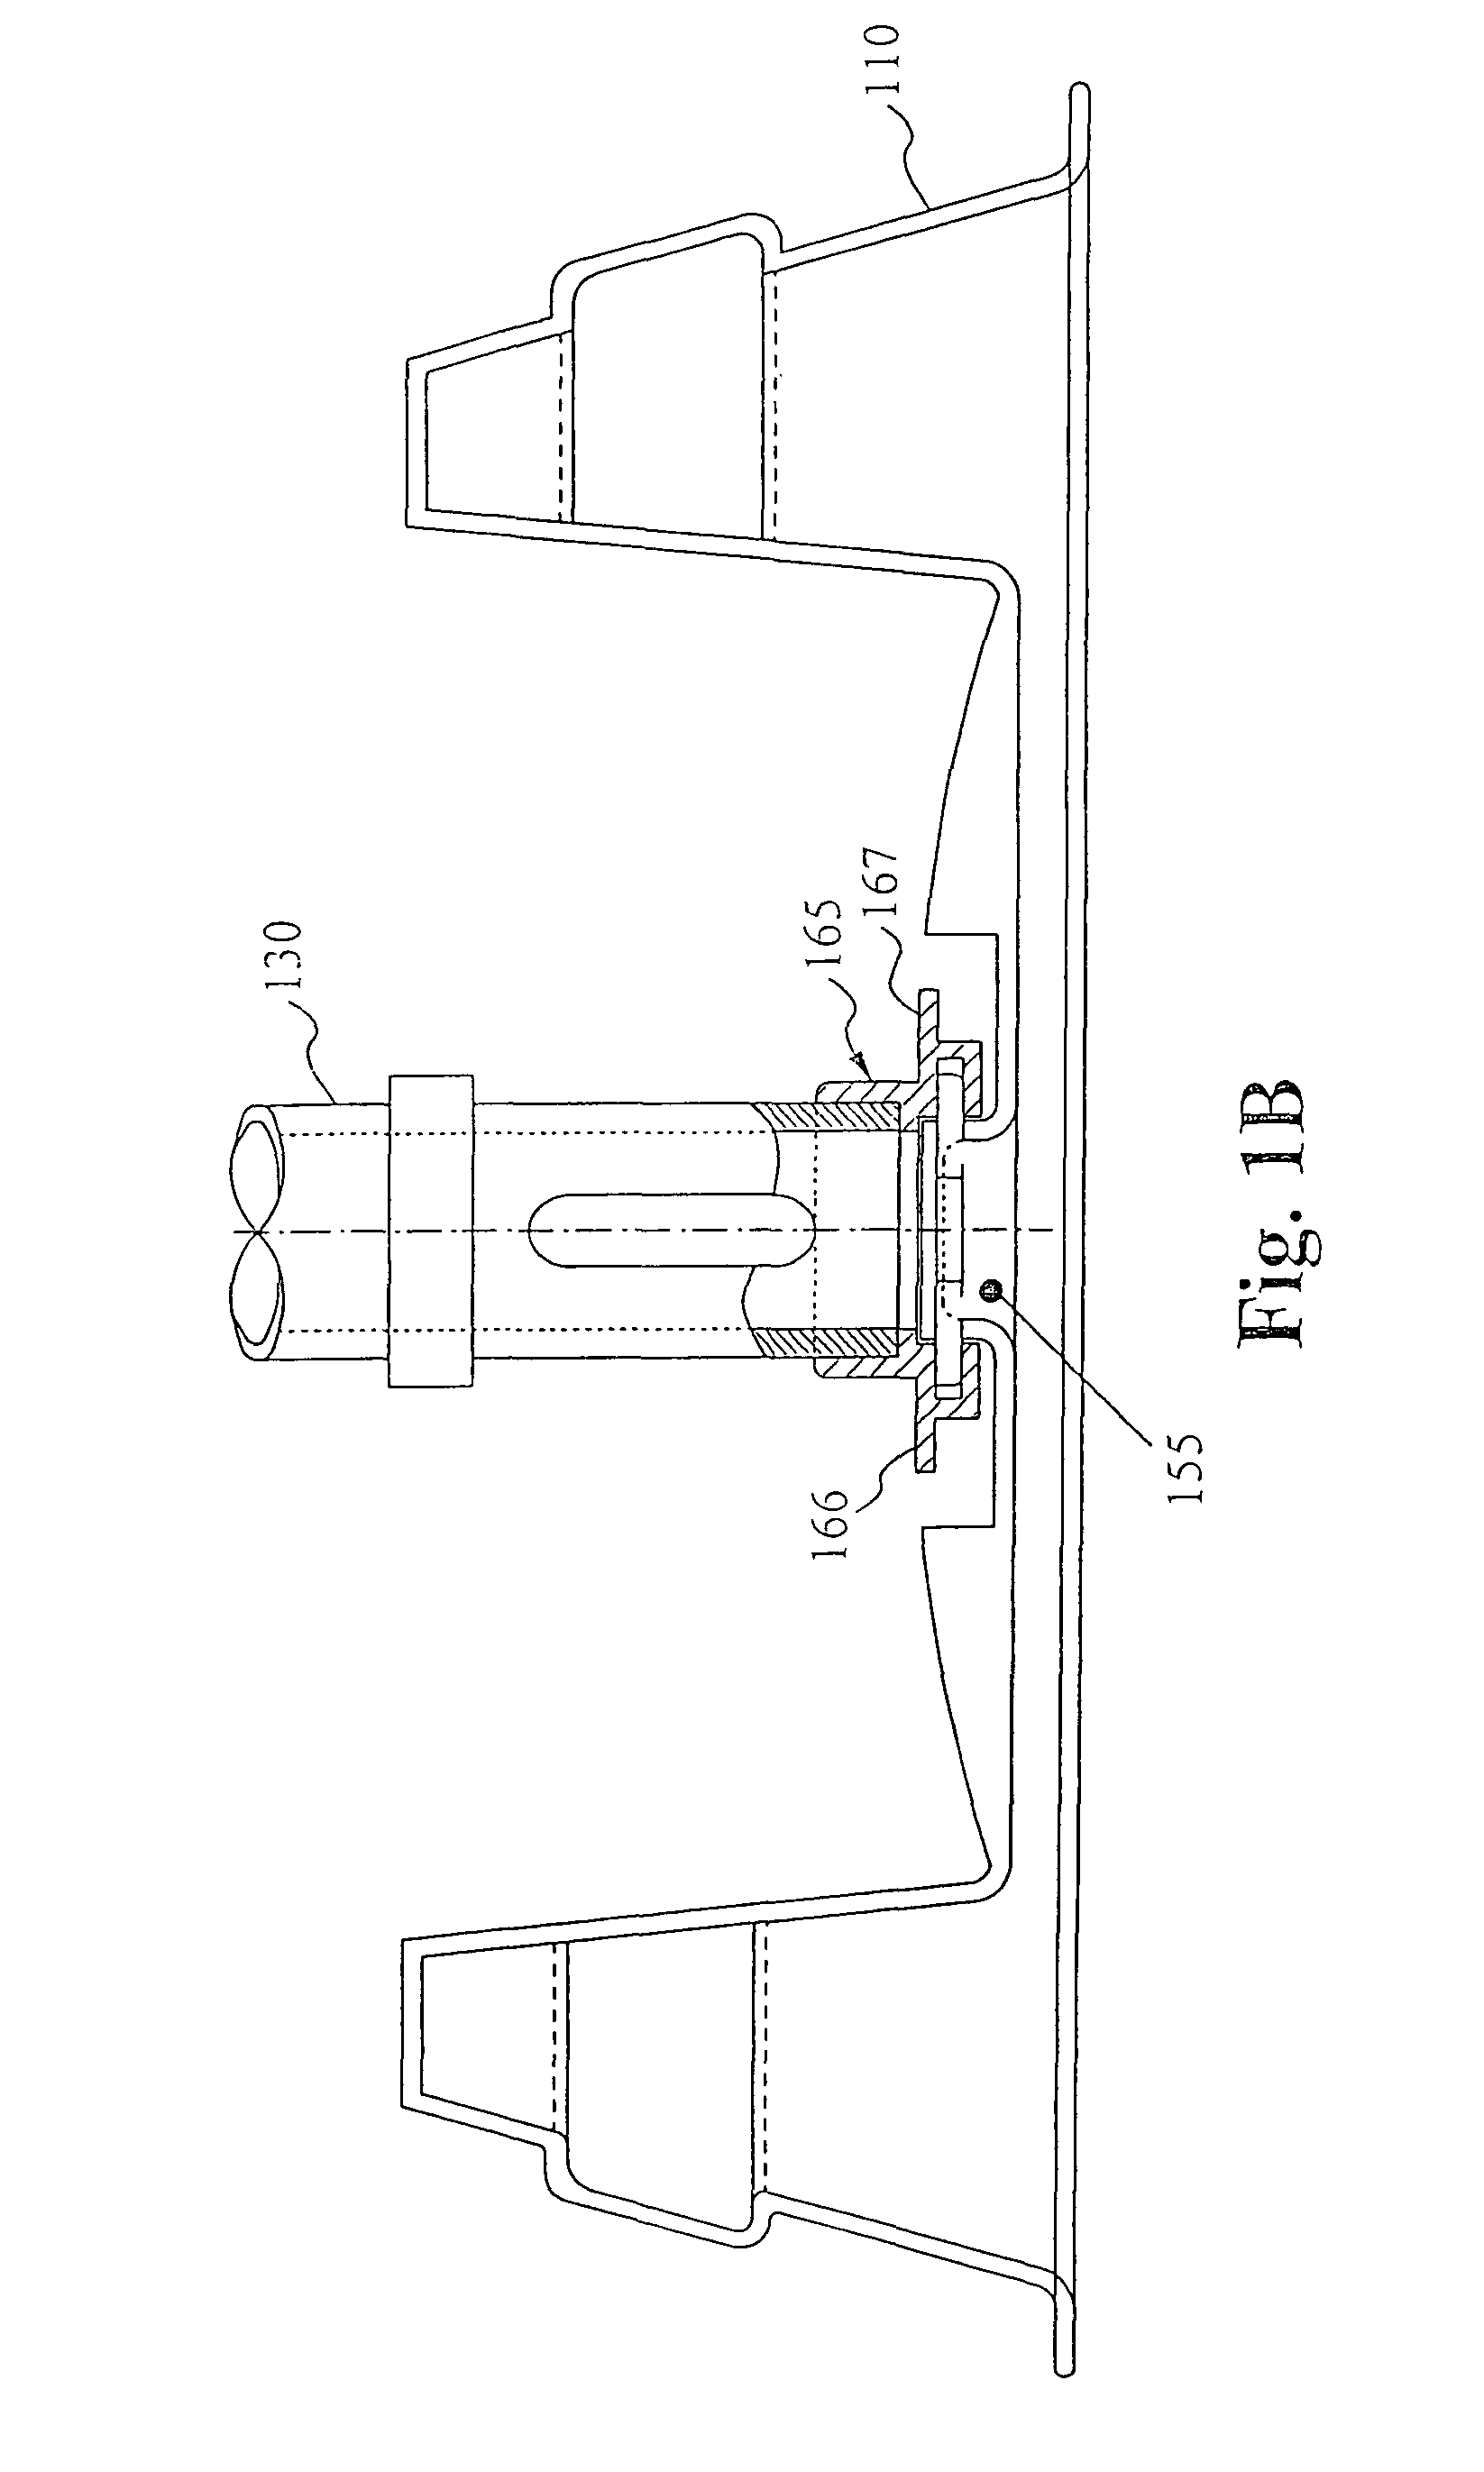 Dual function bowl lifting and filling apparatus with interchangeable cleaning attachment